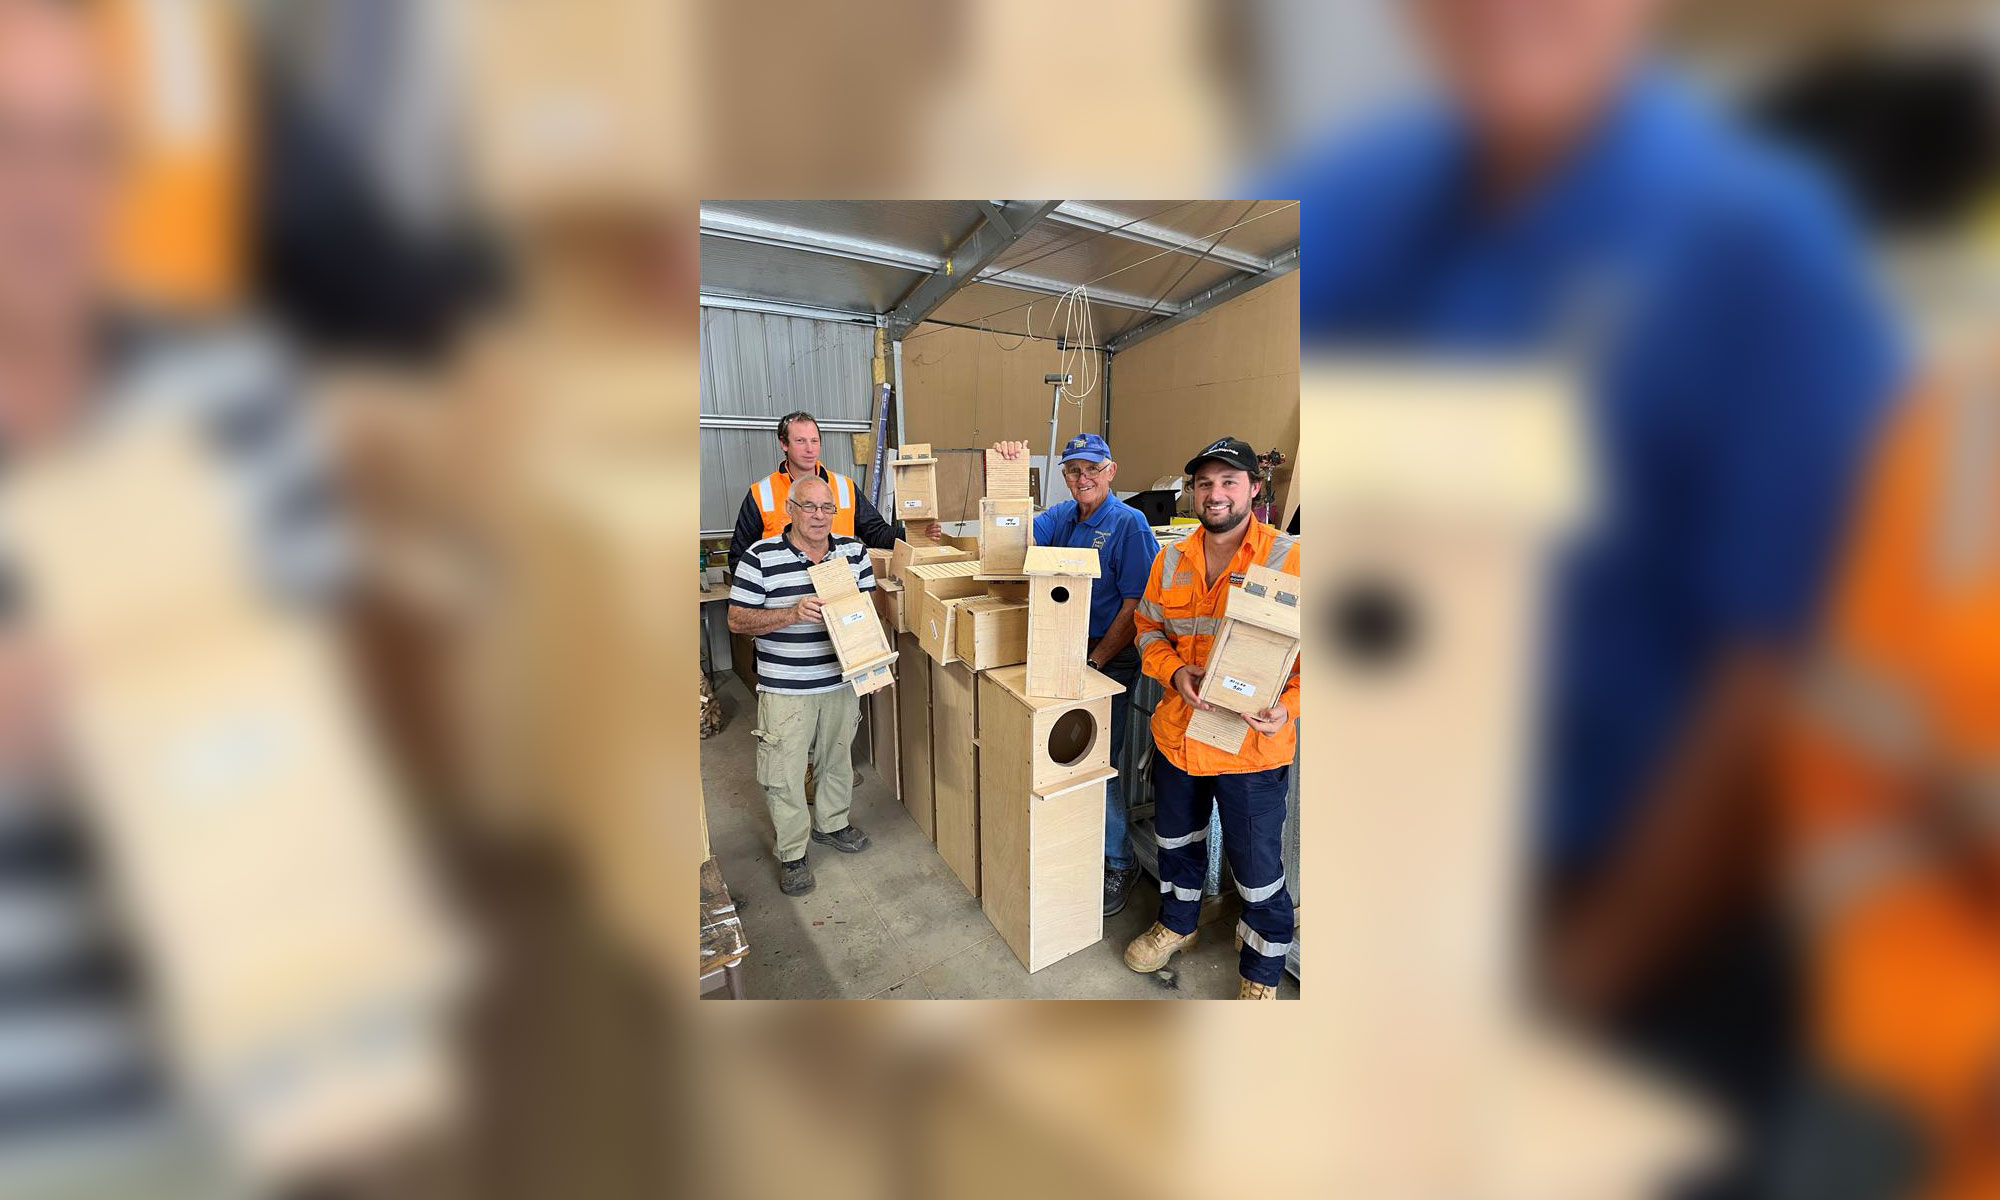 Paul Servaes and Tony Nolan from the Wangaratta District Men’s Shed hand over the nesting boxes to Steve Eeles, McConnell Dowell Environment and Sustainability Manager and Damon Barclay, McConnell Dowell Environmental and Sustainability Adviser.